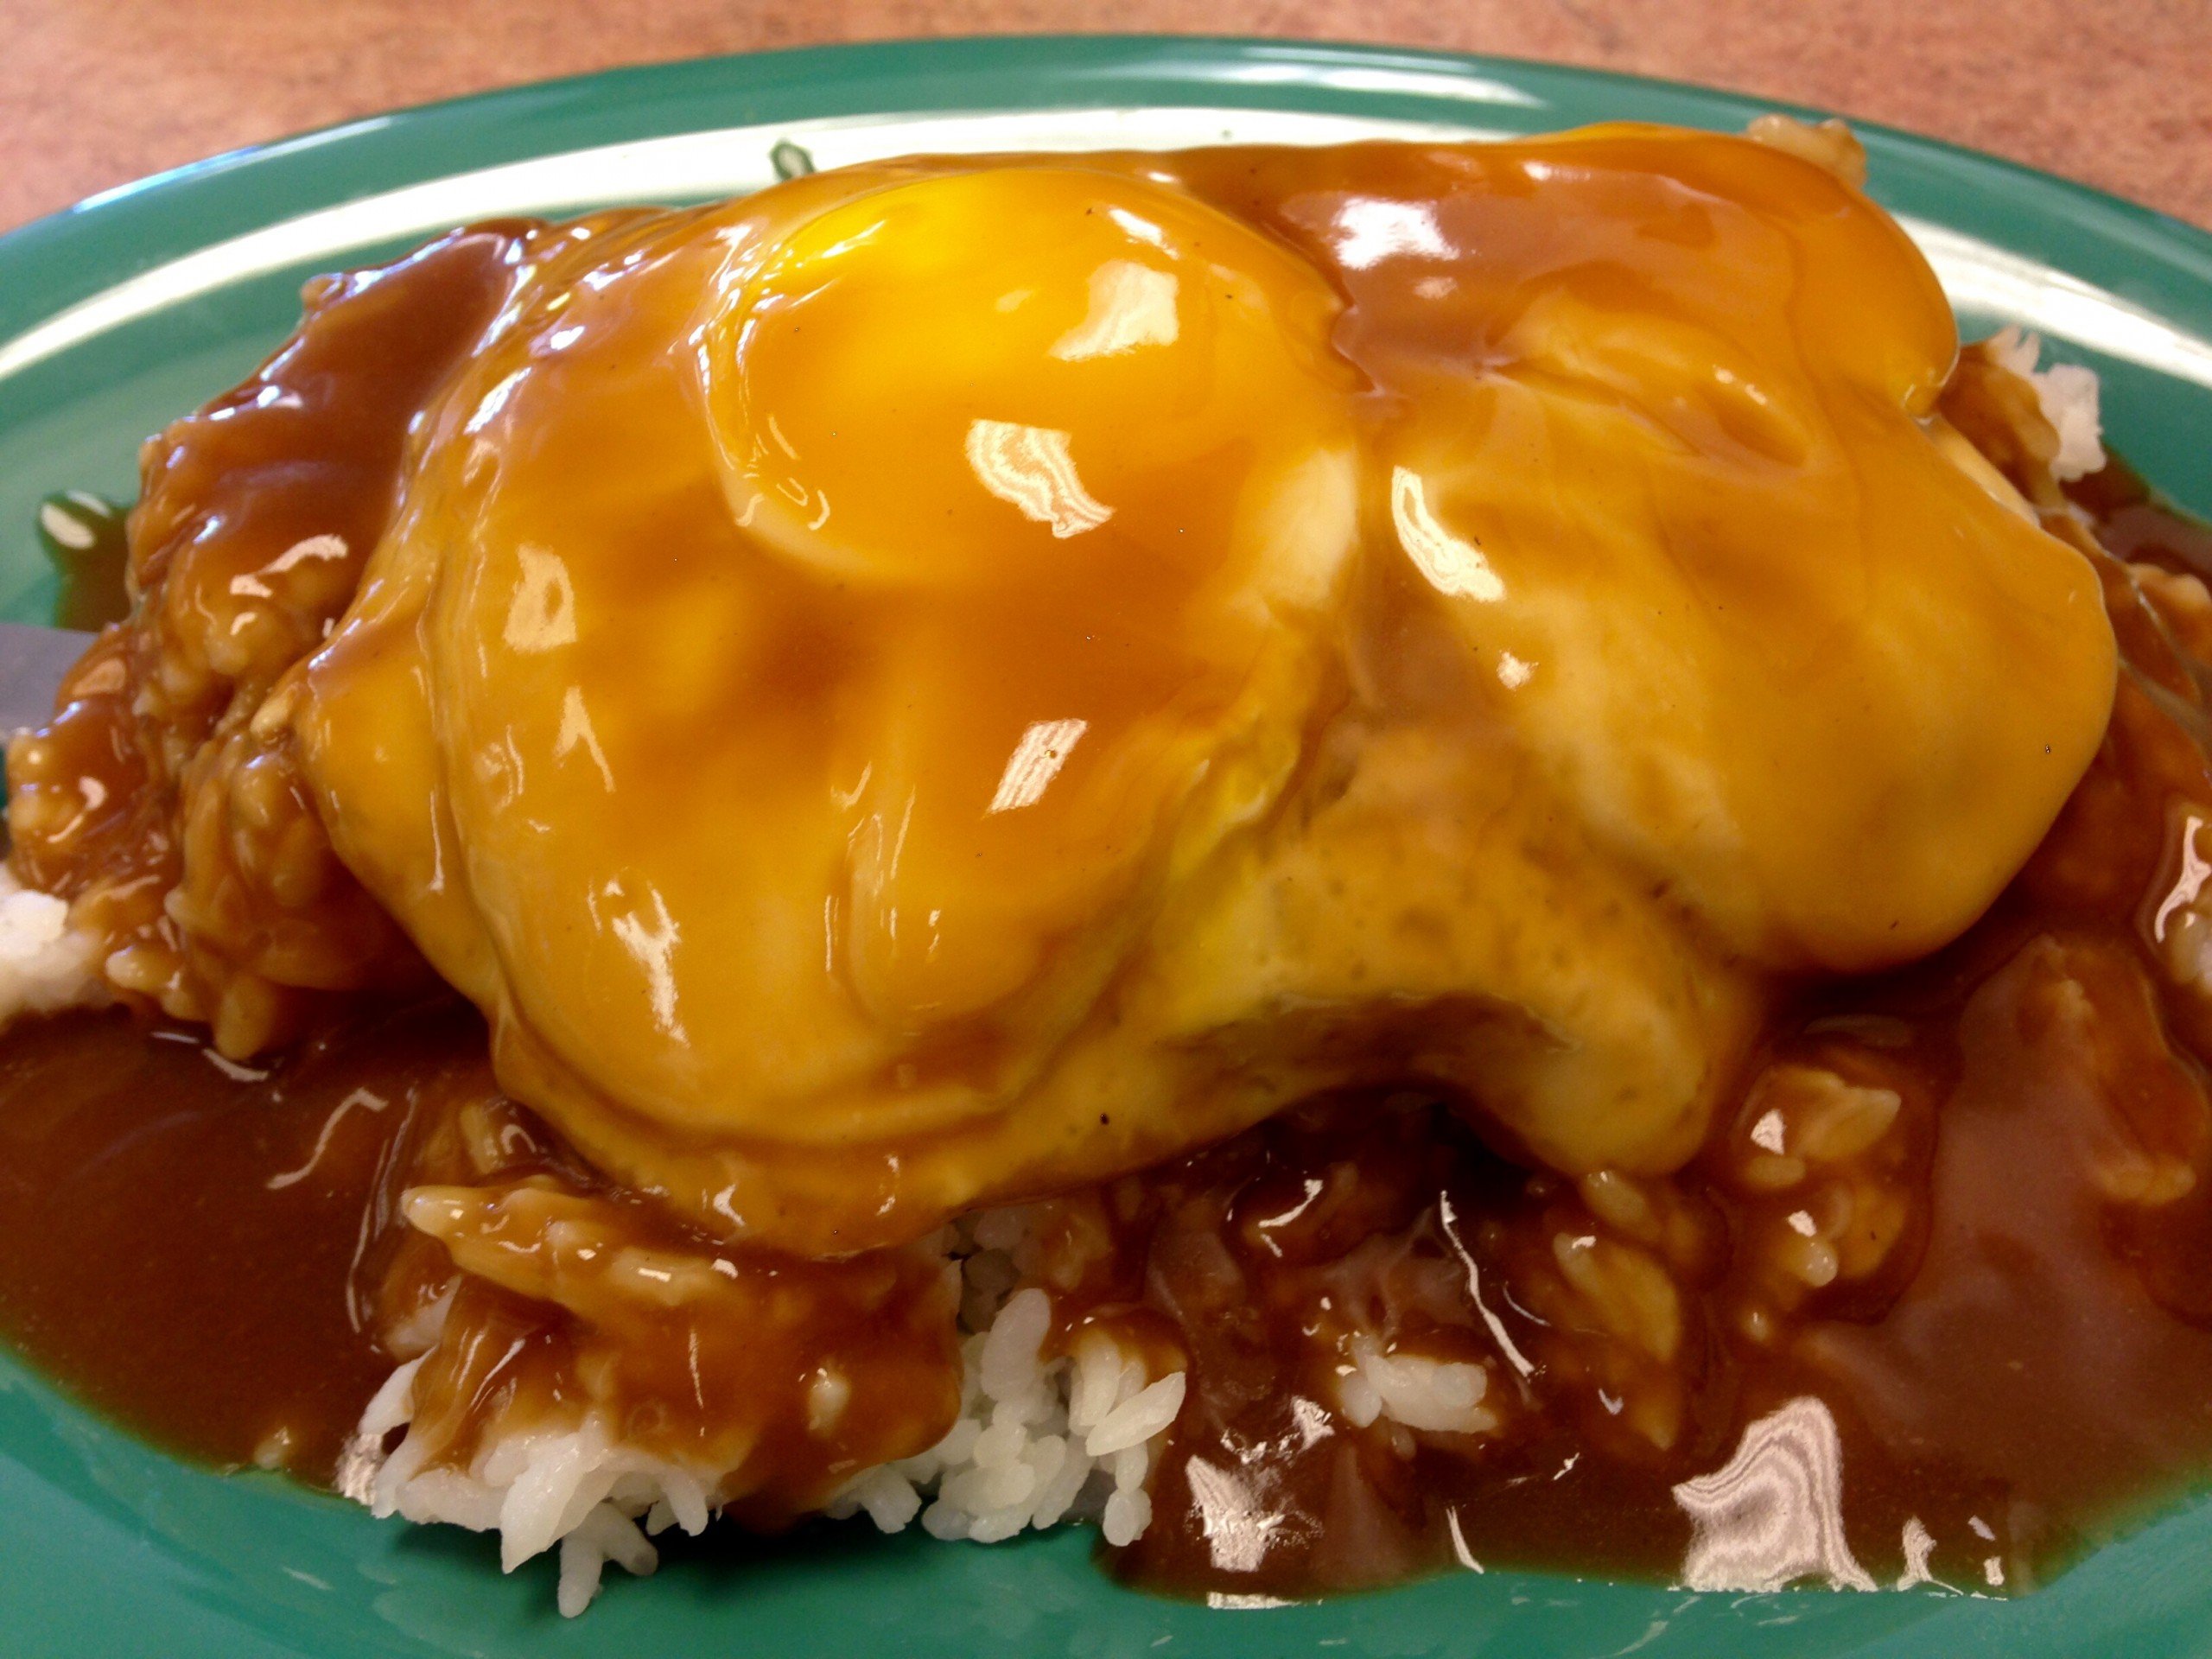 One of the most popular items is the loco moco, you can also substitute the hamburger patty for kalua pig or corned beef hash. The hamburger was too tough for my liking, although it was well seasoned and the gravy was perfect and amazing. 